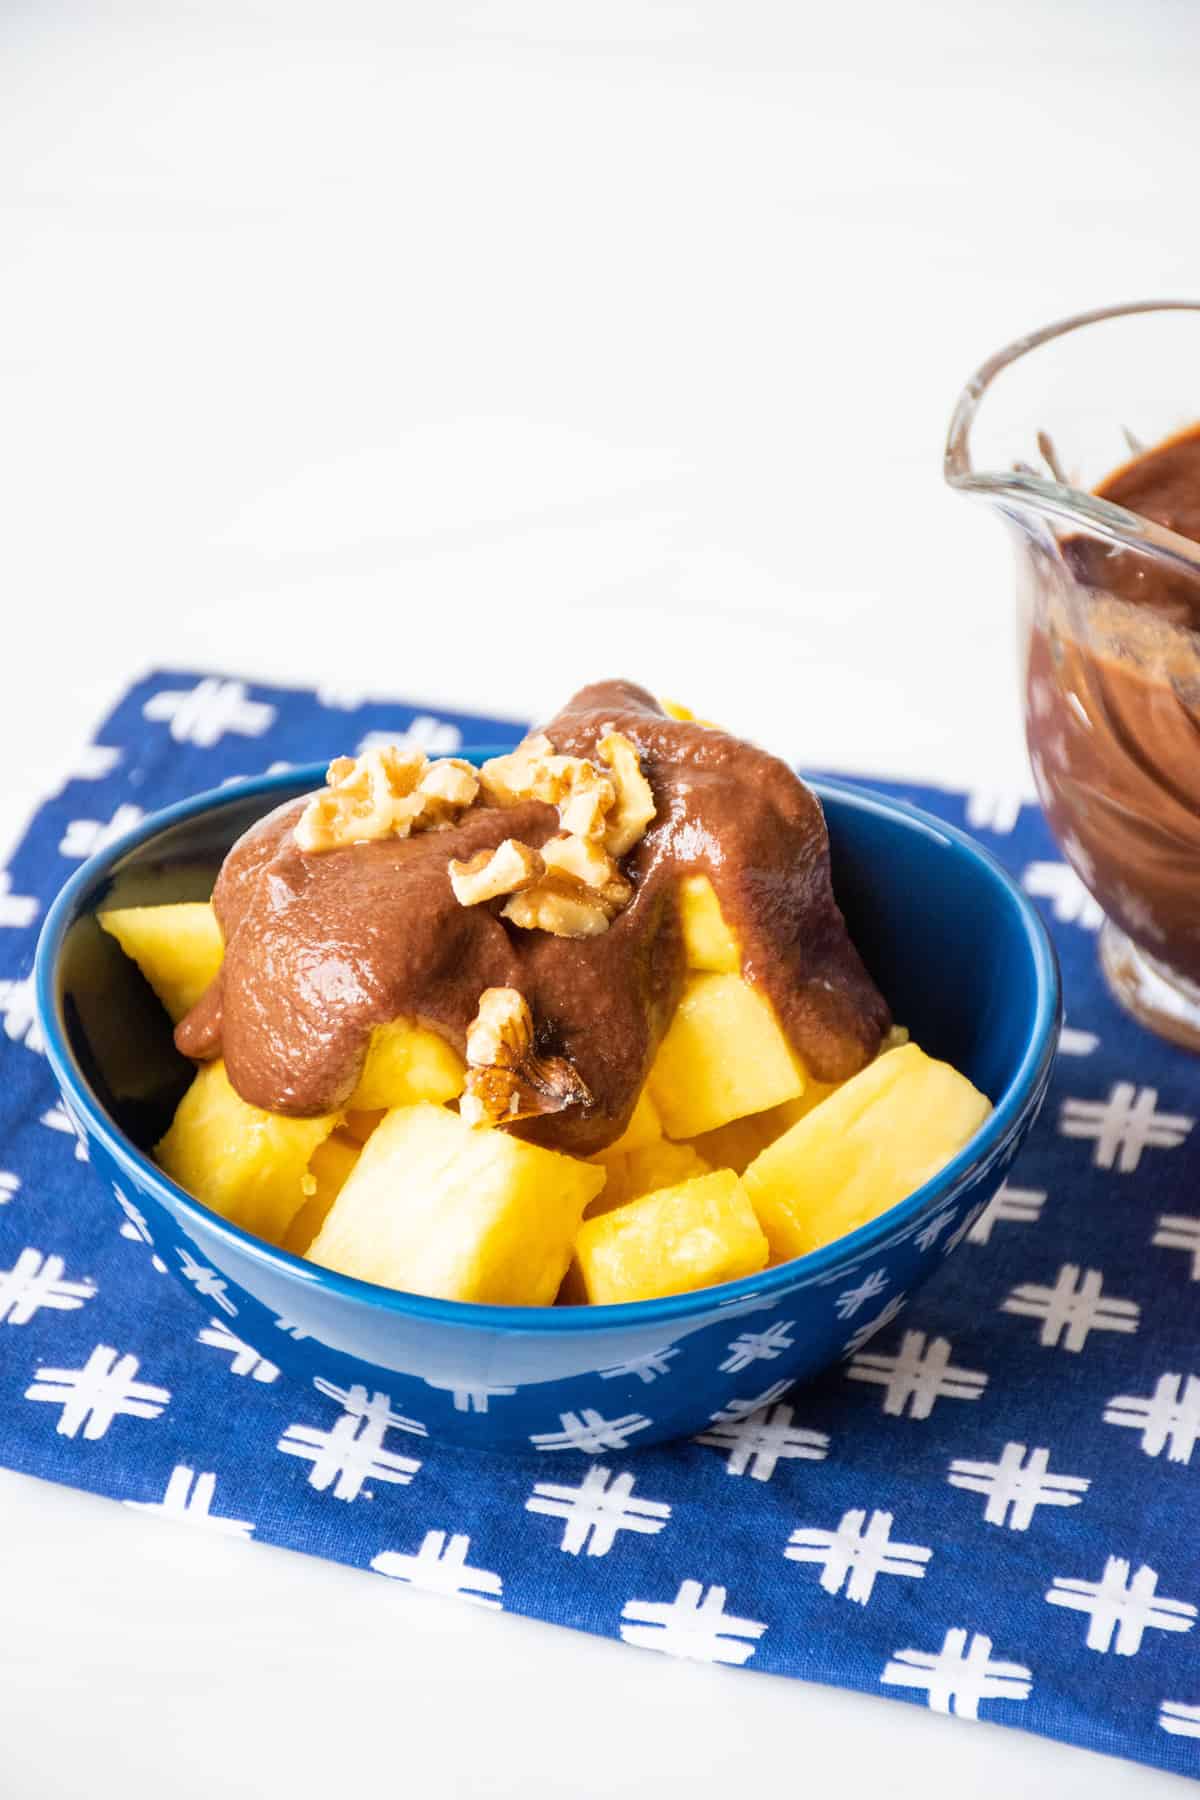 Bowl of pineapple covered with chocolate sauce and chopped walnuts.